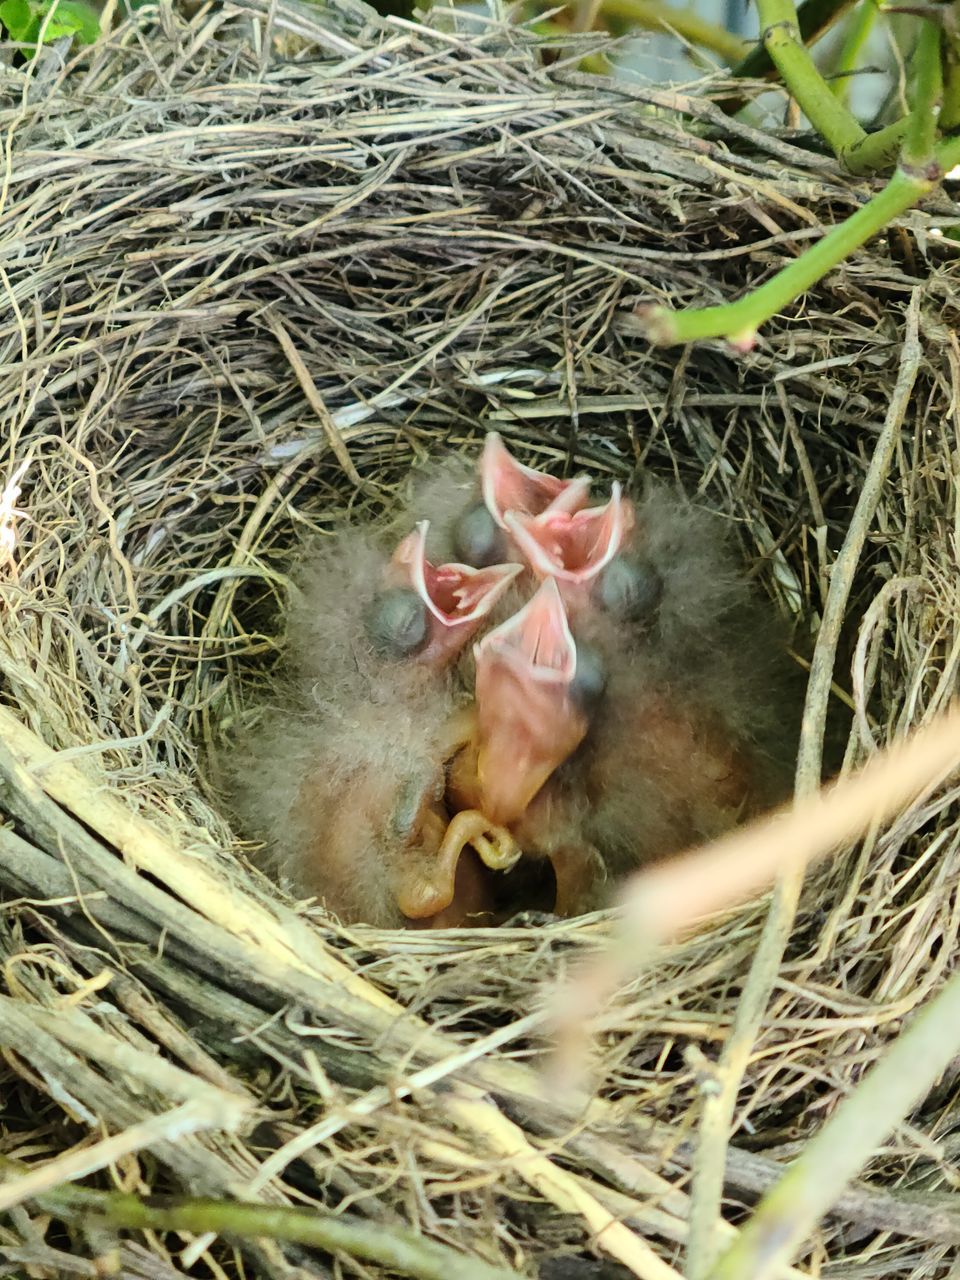 nest, bird nest, animal nest, animal themes, animal, plant, high angle view, nature, young animal, bird, wildlife, day, young bird, beginnings, animal wildlife, no people, grass, hay, branch, outdoors, group of animals, mammal, straw, relaxation